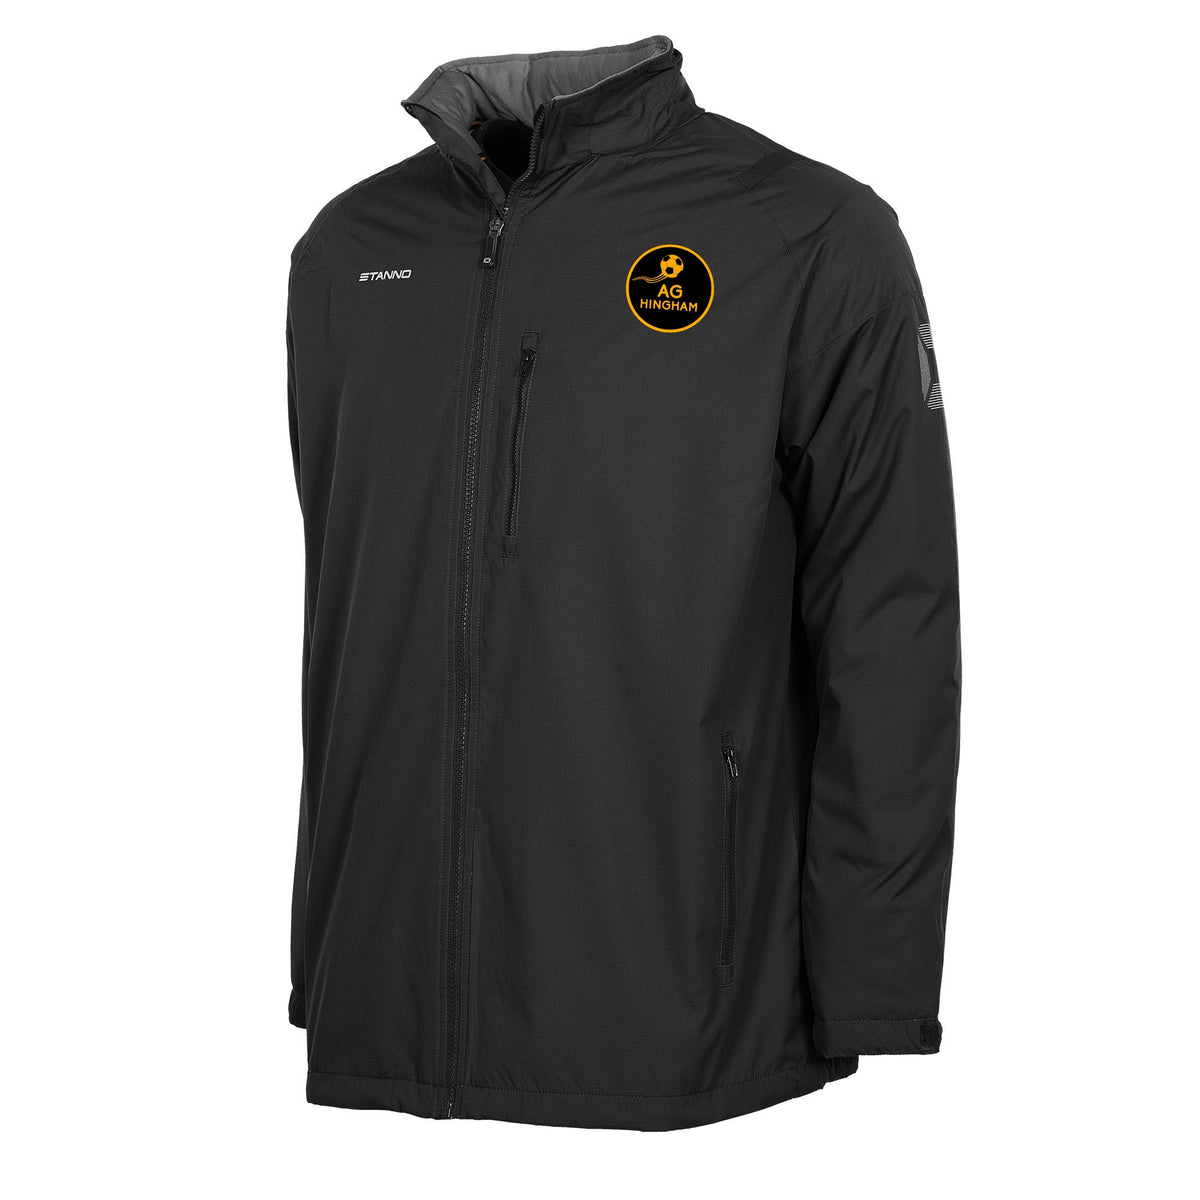 AG Hingham Stanno Centro All Season Jacket in Adult